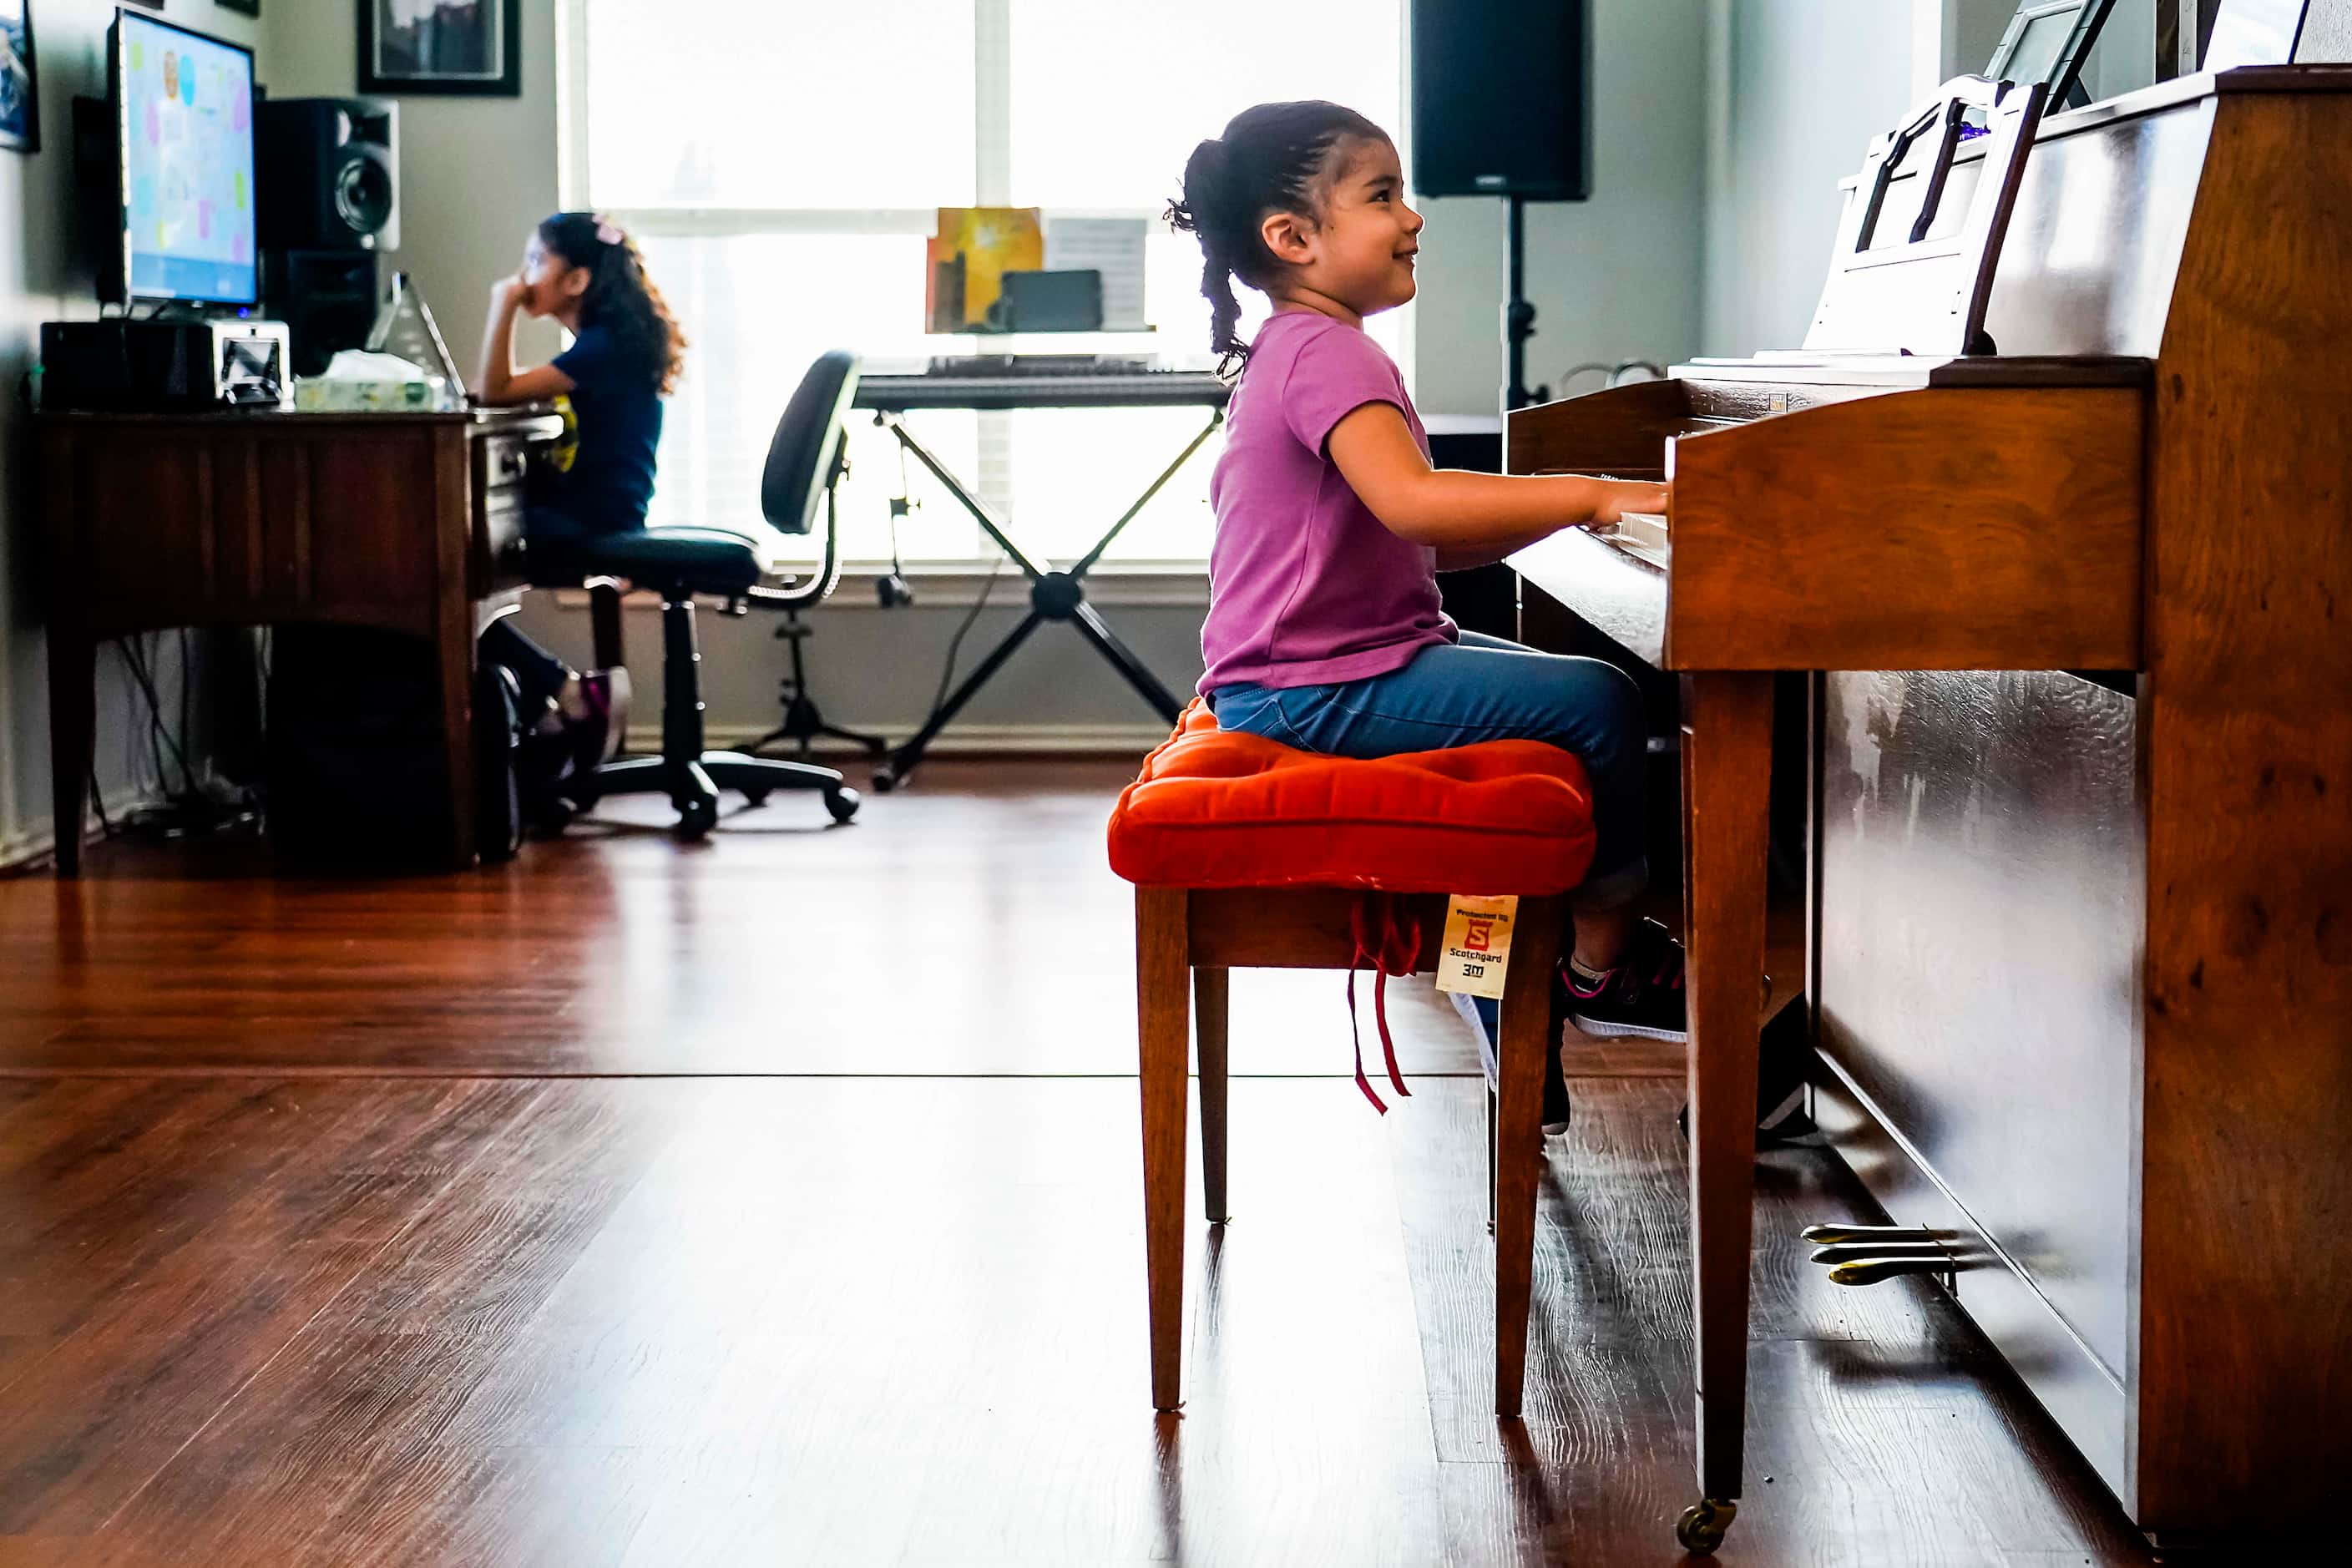 Kamila Cabrera, 4, plays the piano as her sister Selena Cabrera, 9, does school work on a...